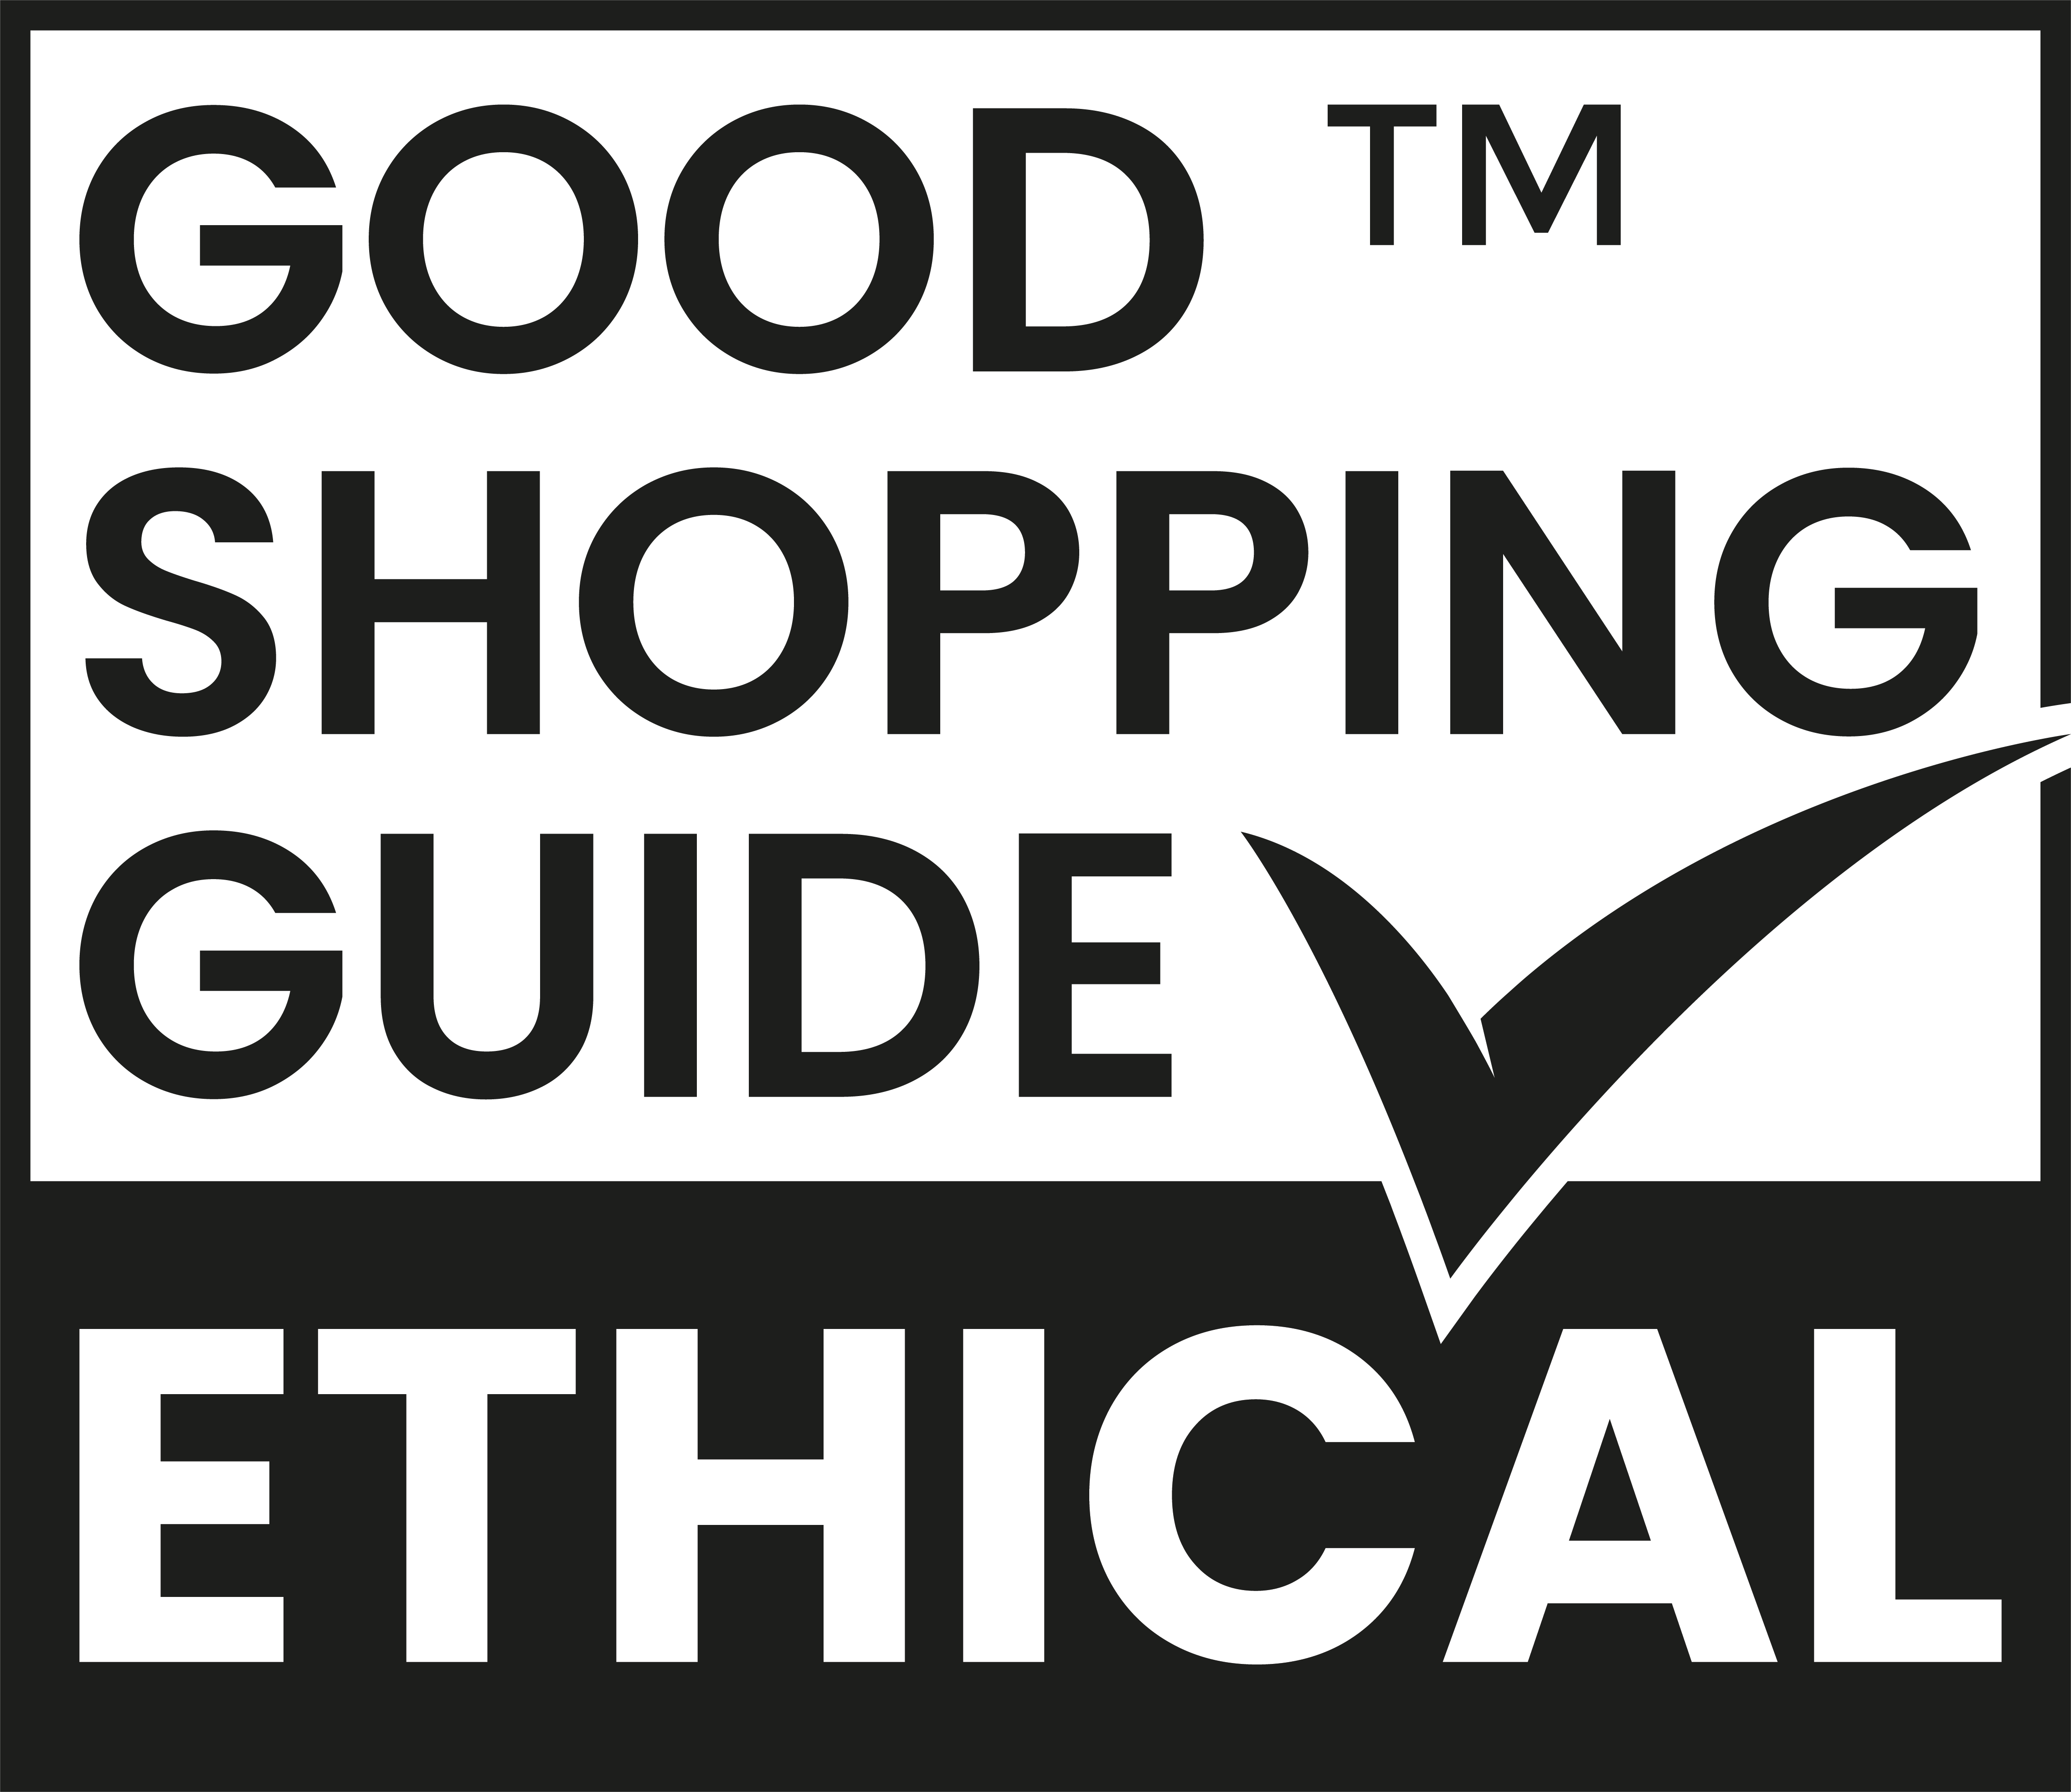 Good Shopping Guide ETHICAL, Ethical, Green, Downton, Distillery